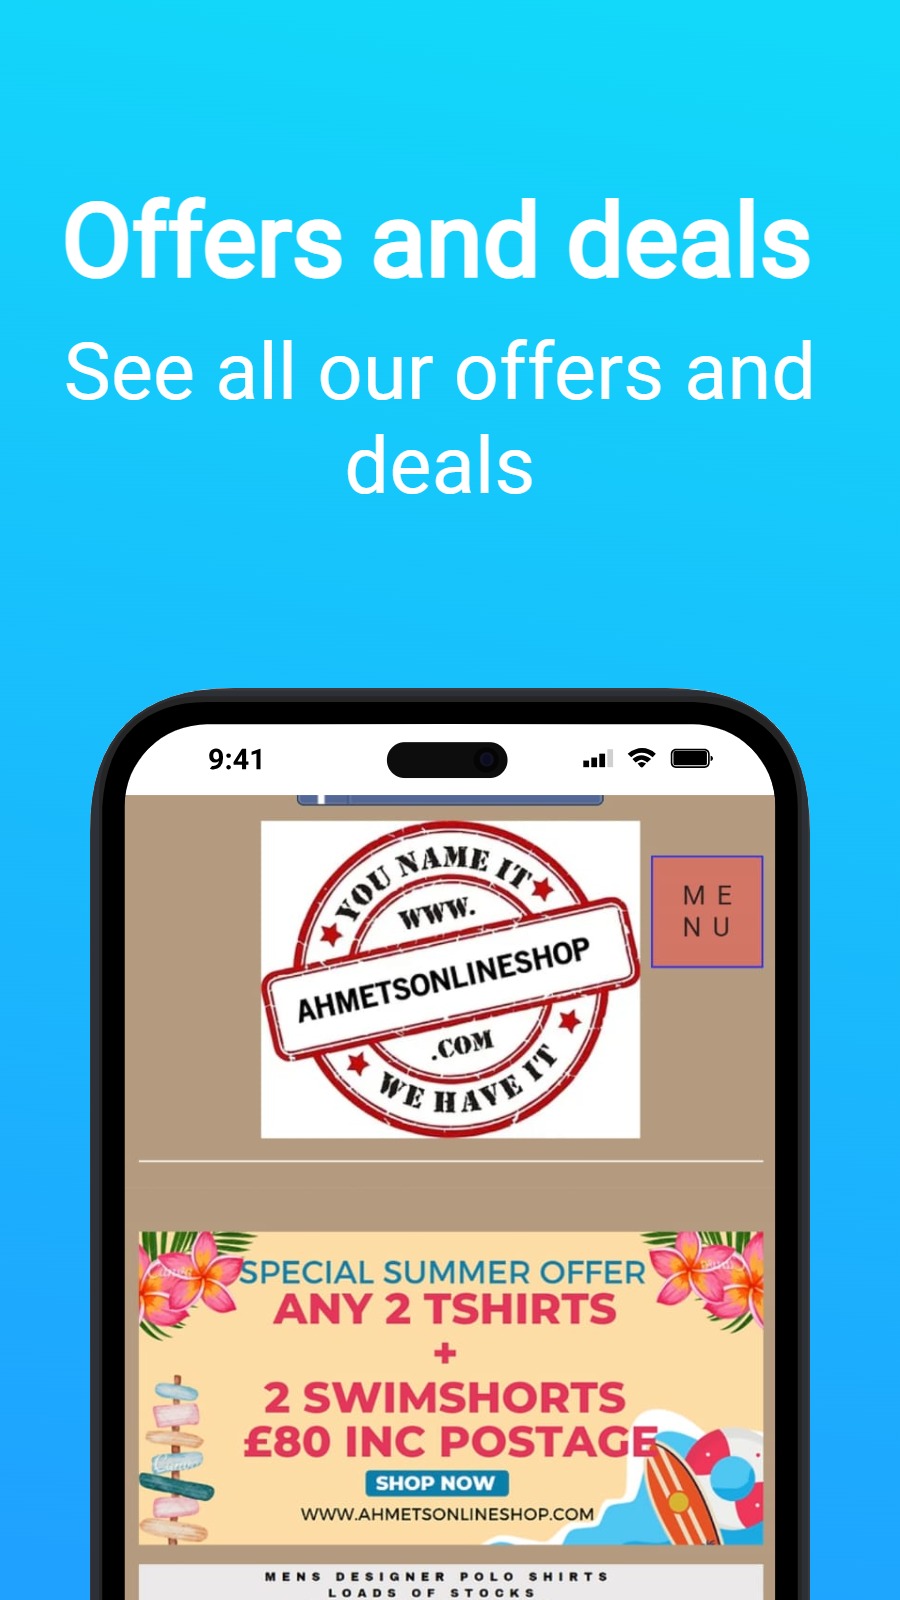 Offers and deals - See all our offers and deals